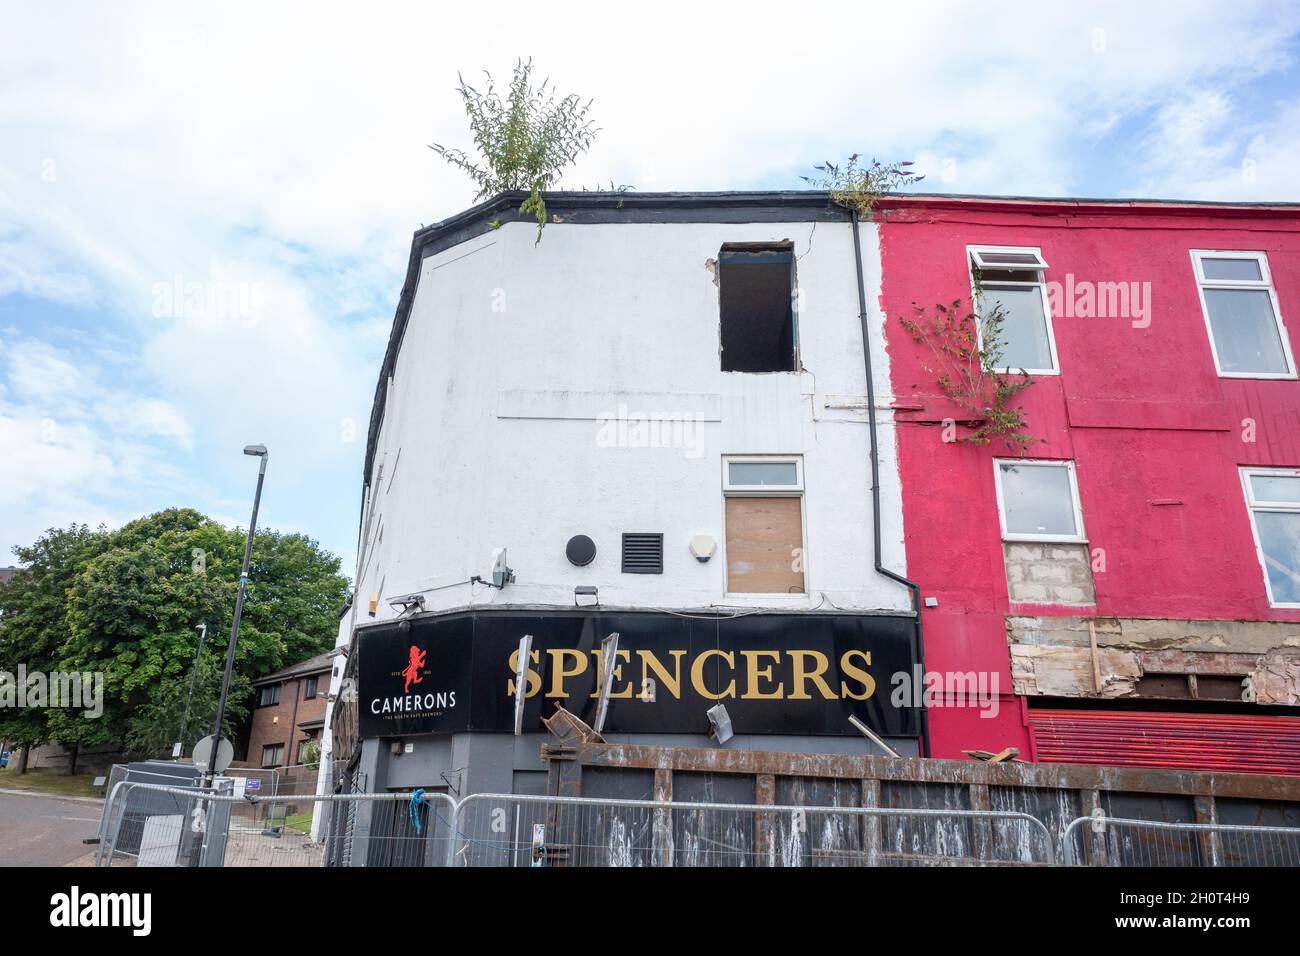 Gateshead UK: 14th August 2021: Old abandoned pubs being prepped for demolition Stock Photo